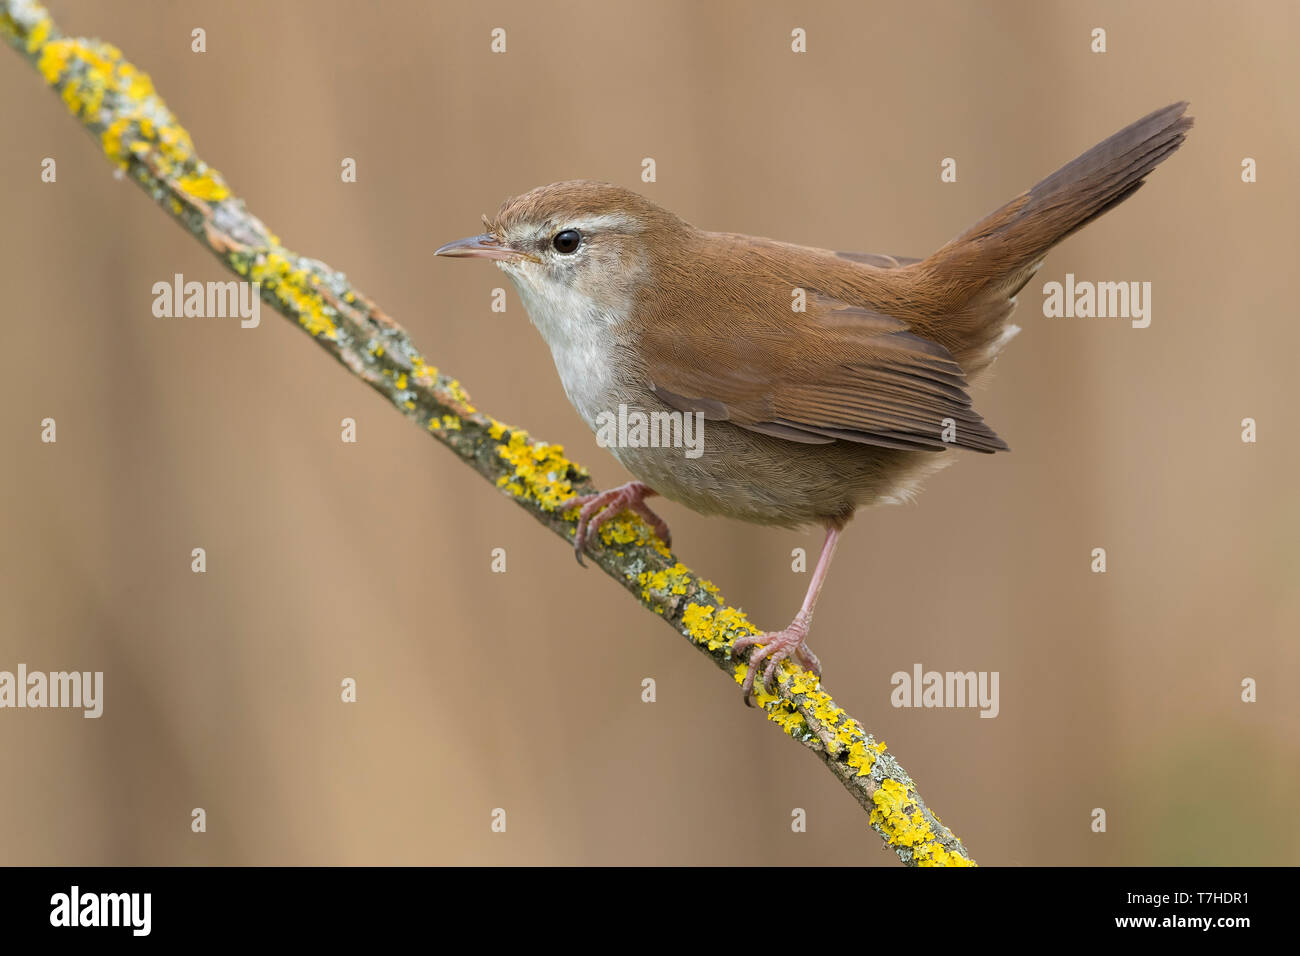 Cetti's Warbler (Cettia cetti) perched on a twig in an Italian swamp, against brown background. Stock Photo